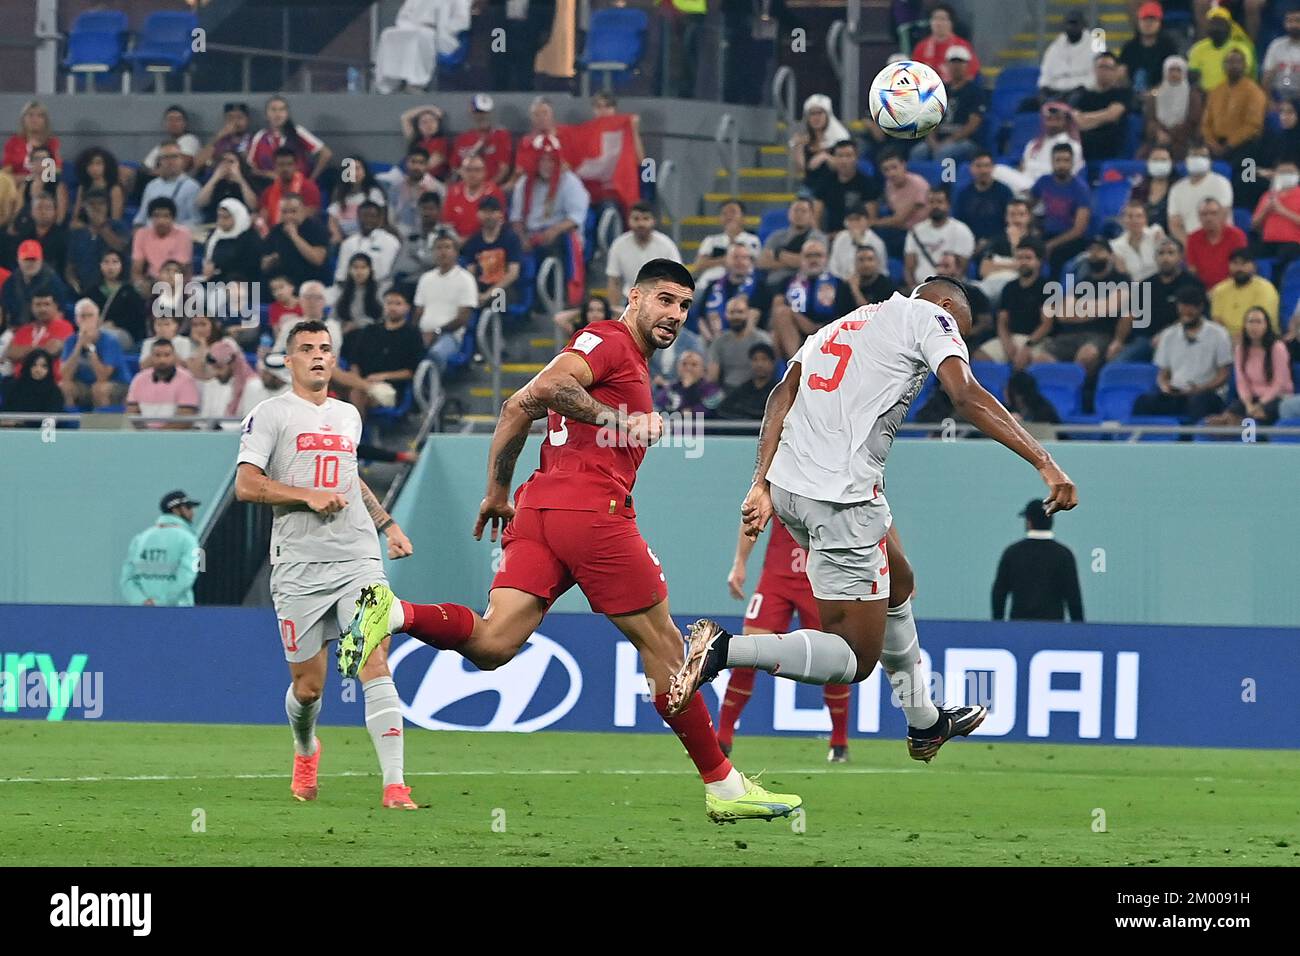 goal 1-1 MITROVIC Aleksandar (SRB), header, action, duels versus Manuel AKANJI (SUI), Serbia (SRB) - Switzerland (SUI) 2-3 group stage group G, game 47 on December 2nd, 2022, Stadium 974, Football World Championship 2022 in Qatar from 20.11. - 18.12.2022 ? Stock Photo